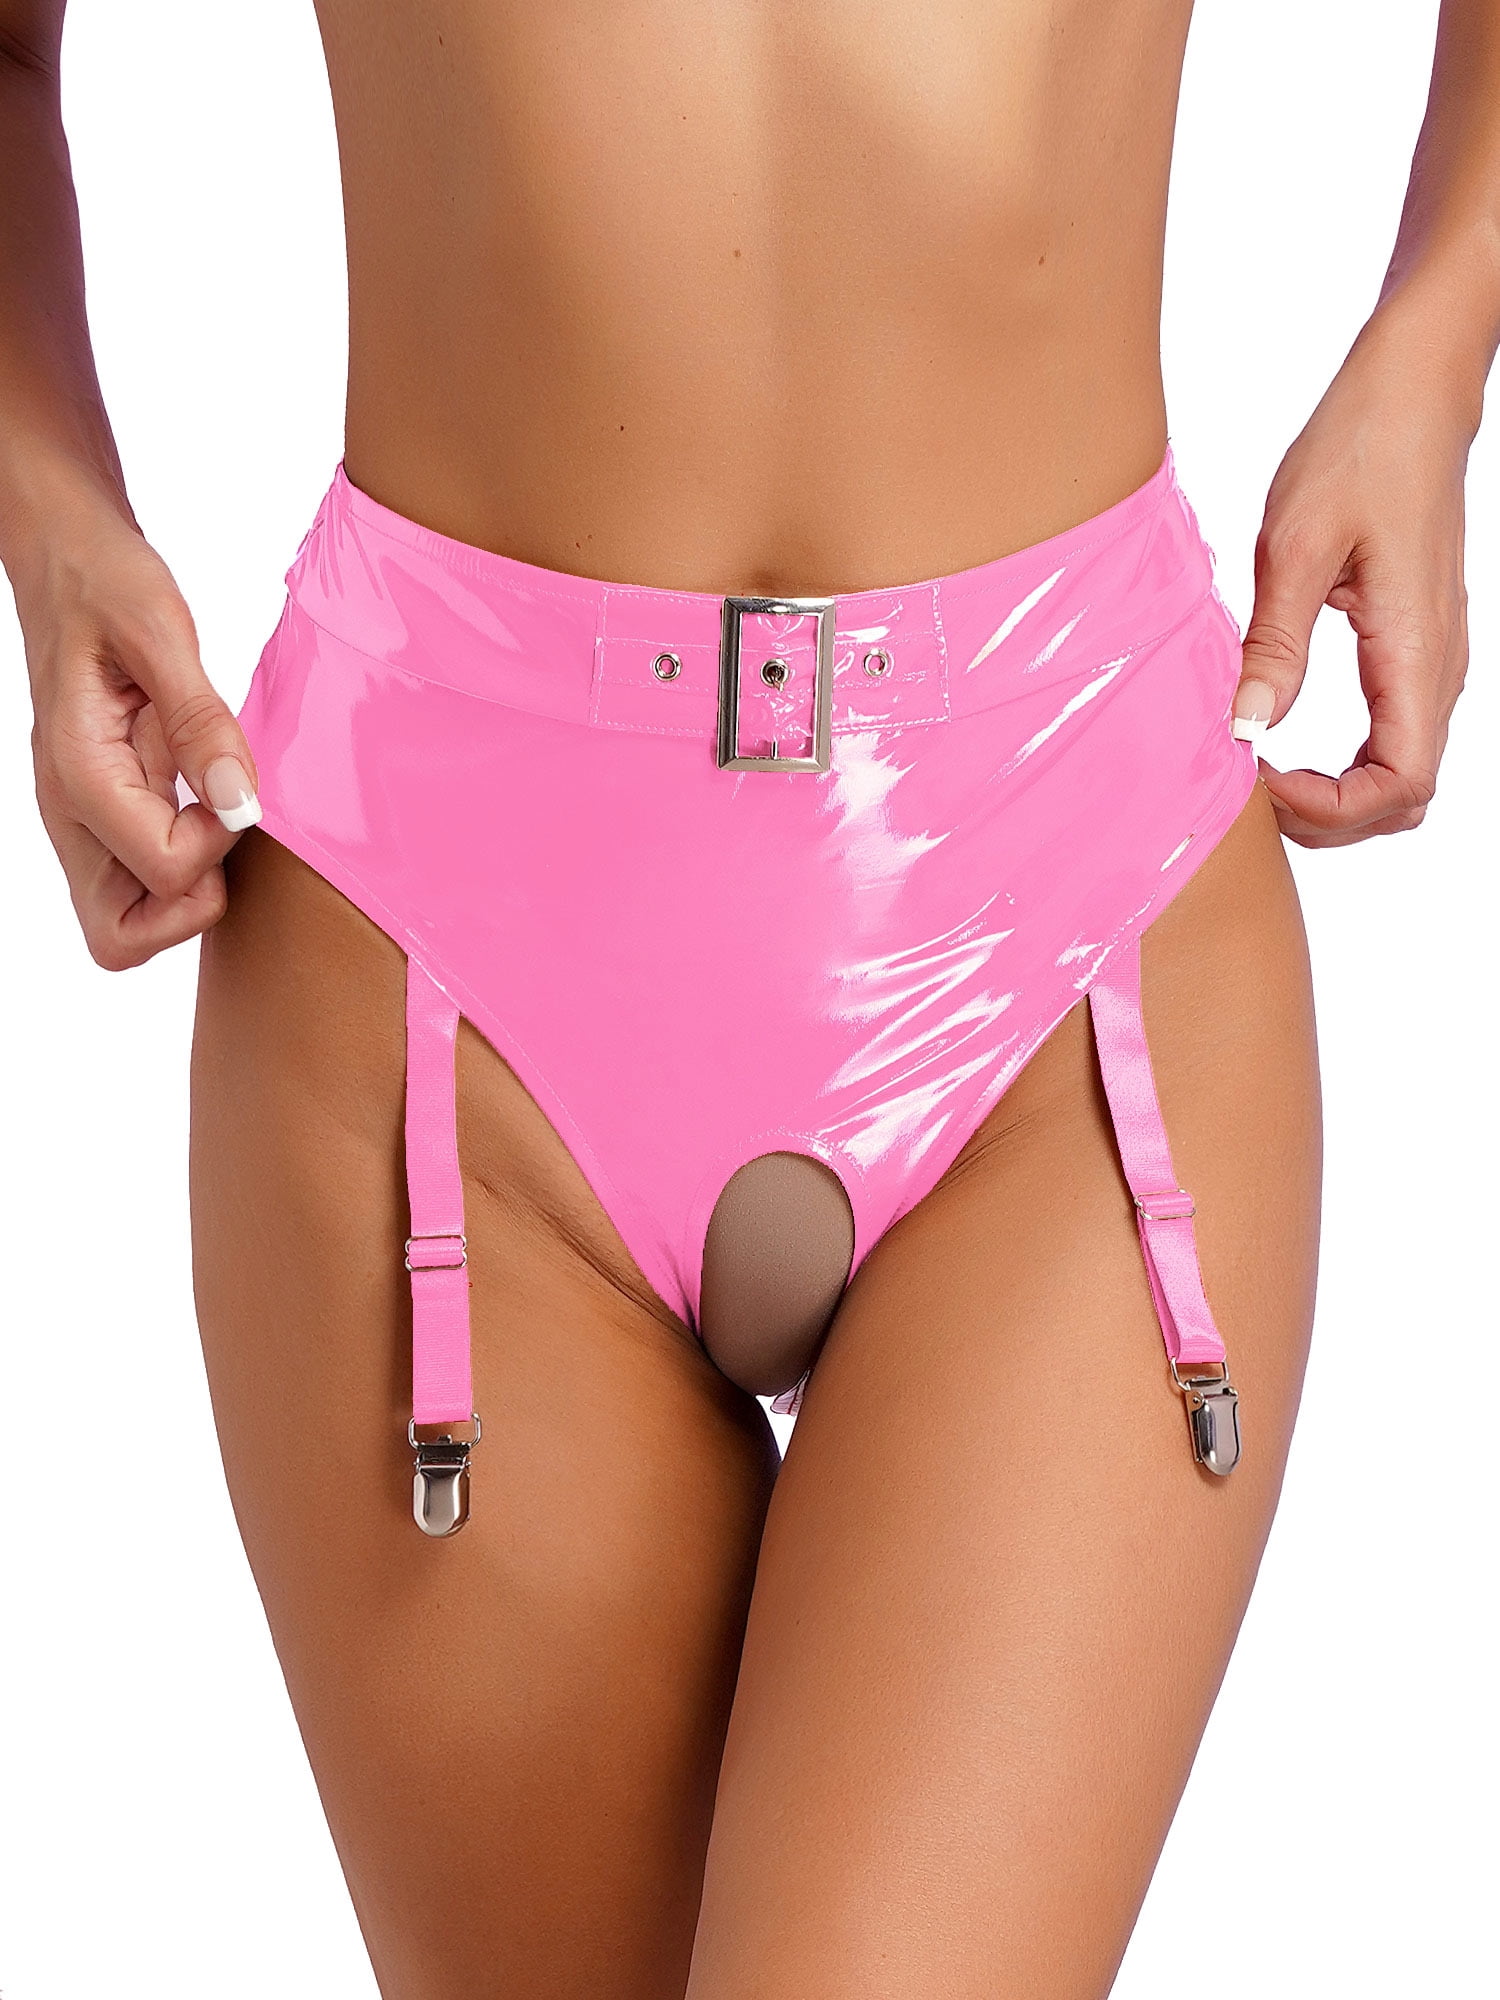 CHICTRY Womens Exotic Lingerie Open Crotch Underwear with Garter Clips  Latex Panties Clubwear A Pink 4XL